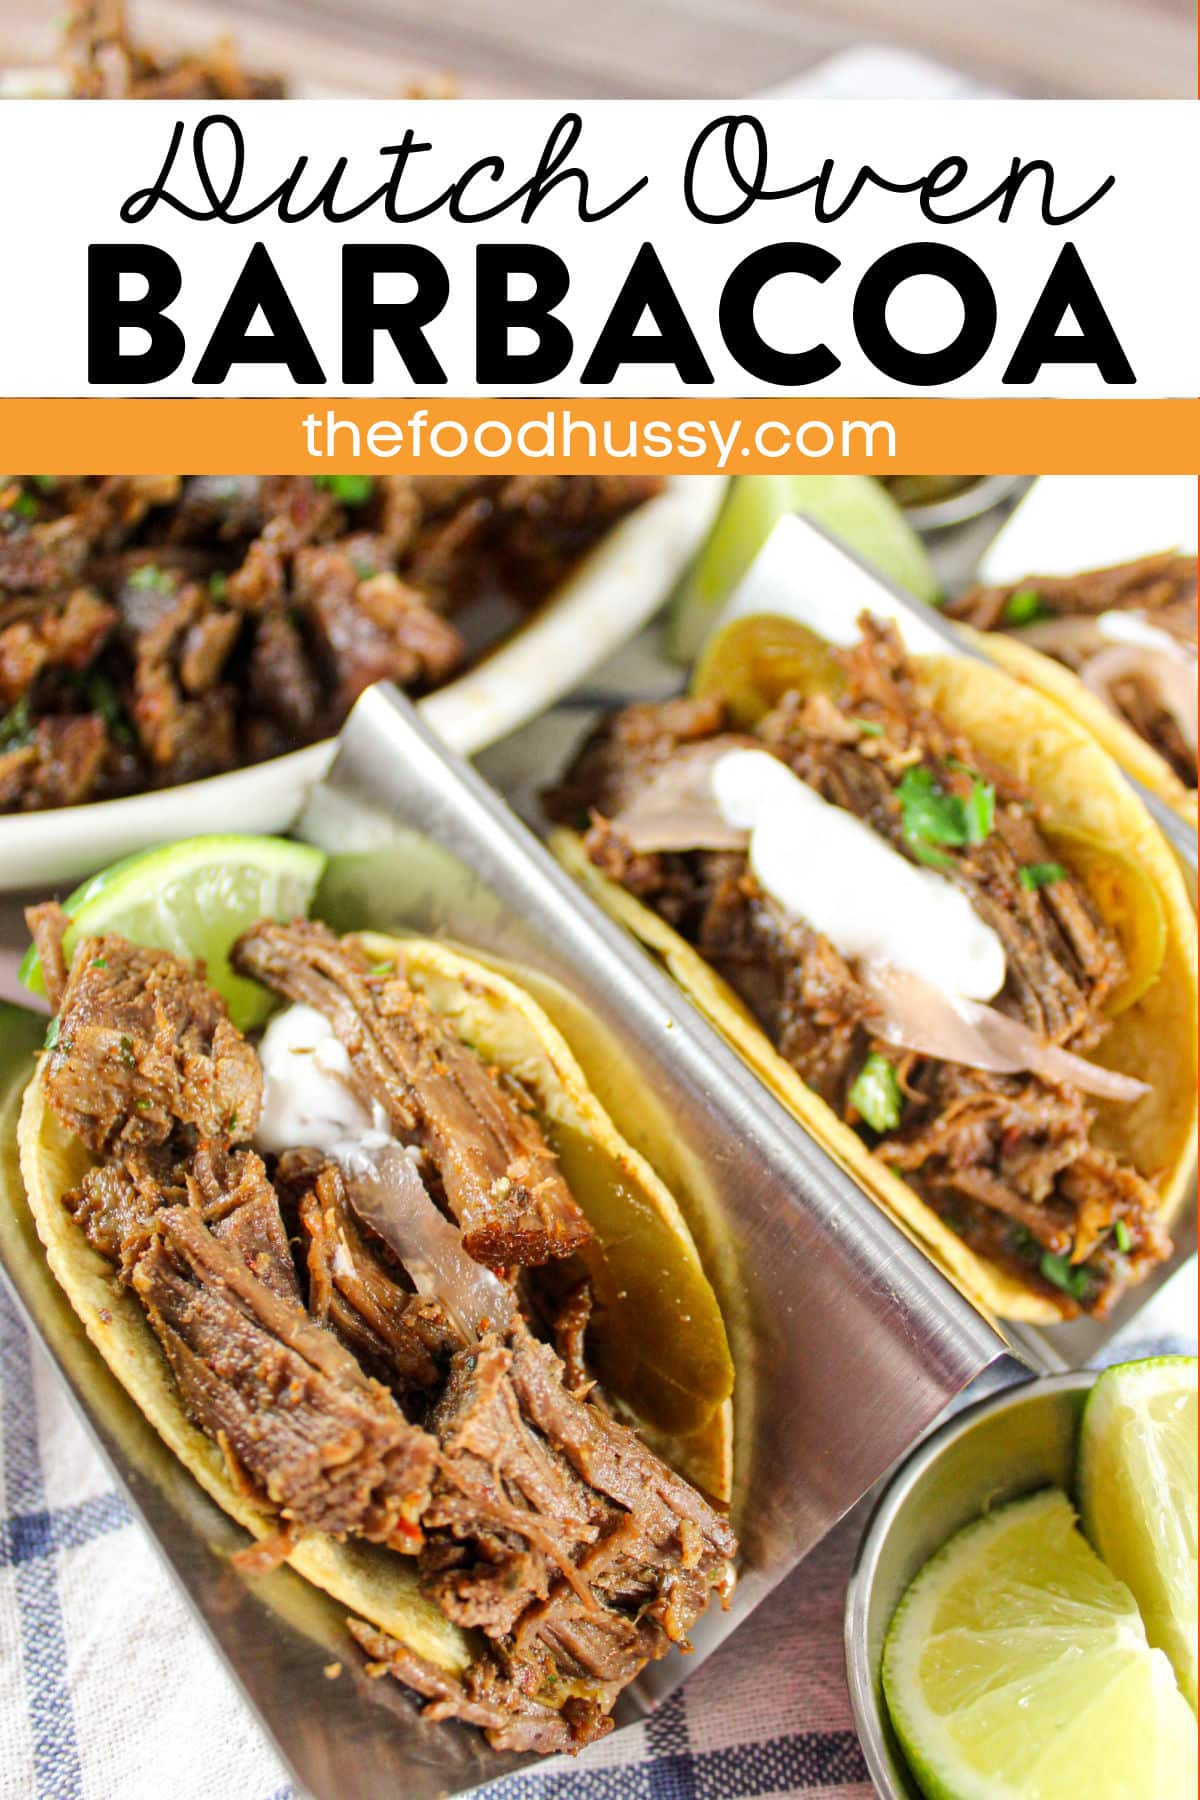 Dutch Oven Barbacoa is an easy way to make this extremely flavorful shredded beef! Serve in tacos, enchiladas, nachos or even in Beef & Noodles. You'll love the spicy chili sauces that every bite is drenched in! via @foodhussy